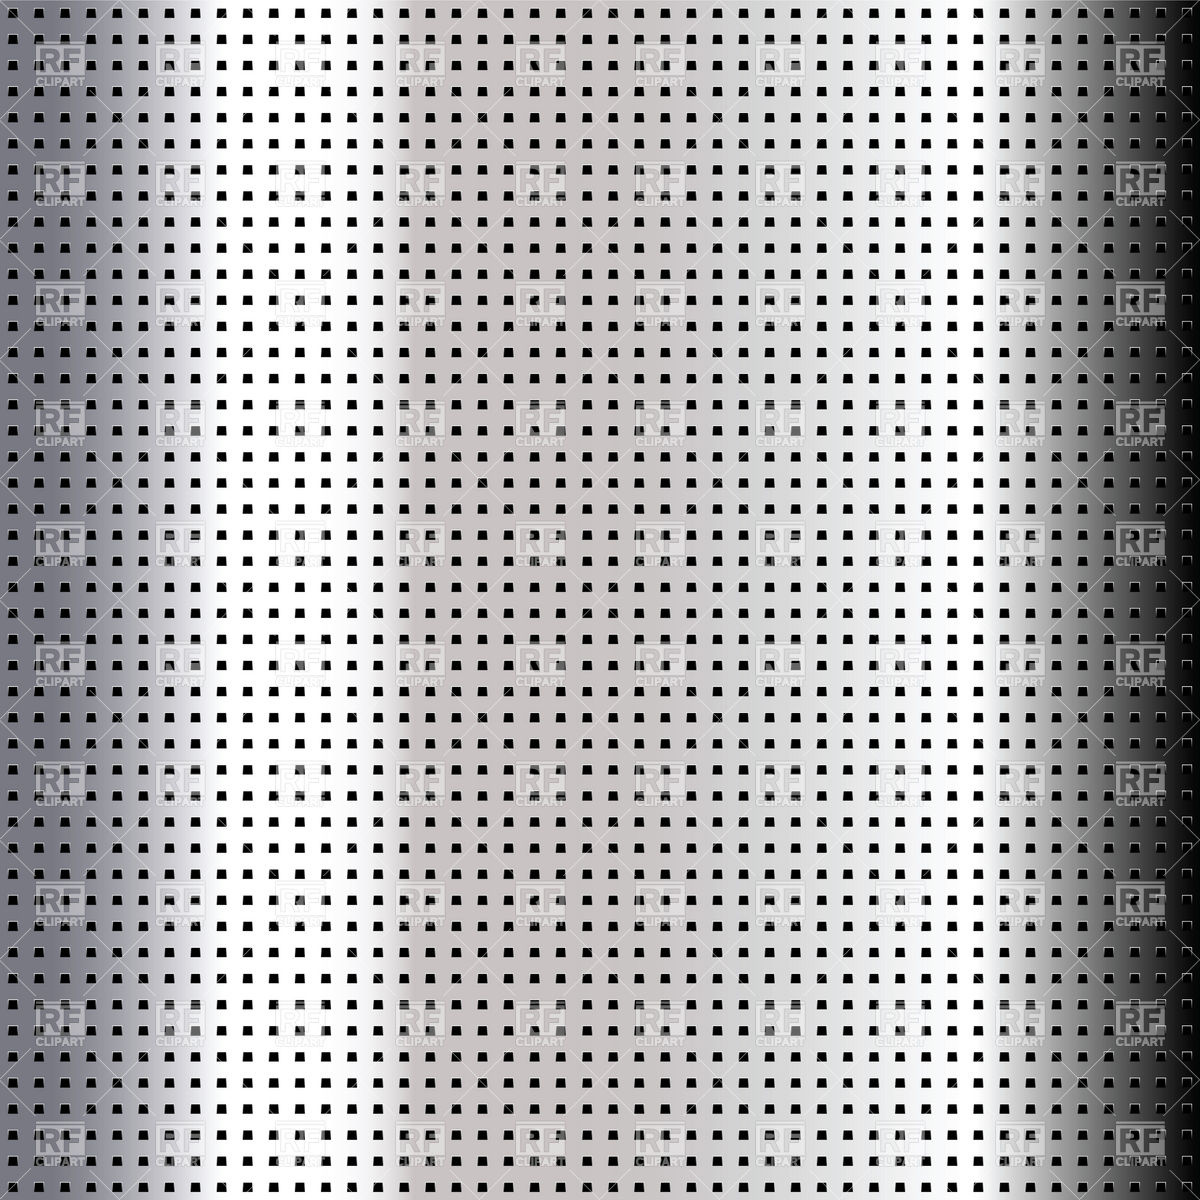 Square Hole Perforated Sheet Metal